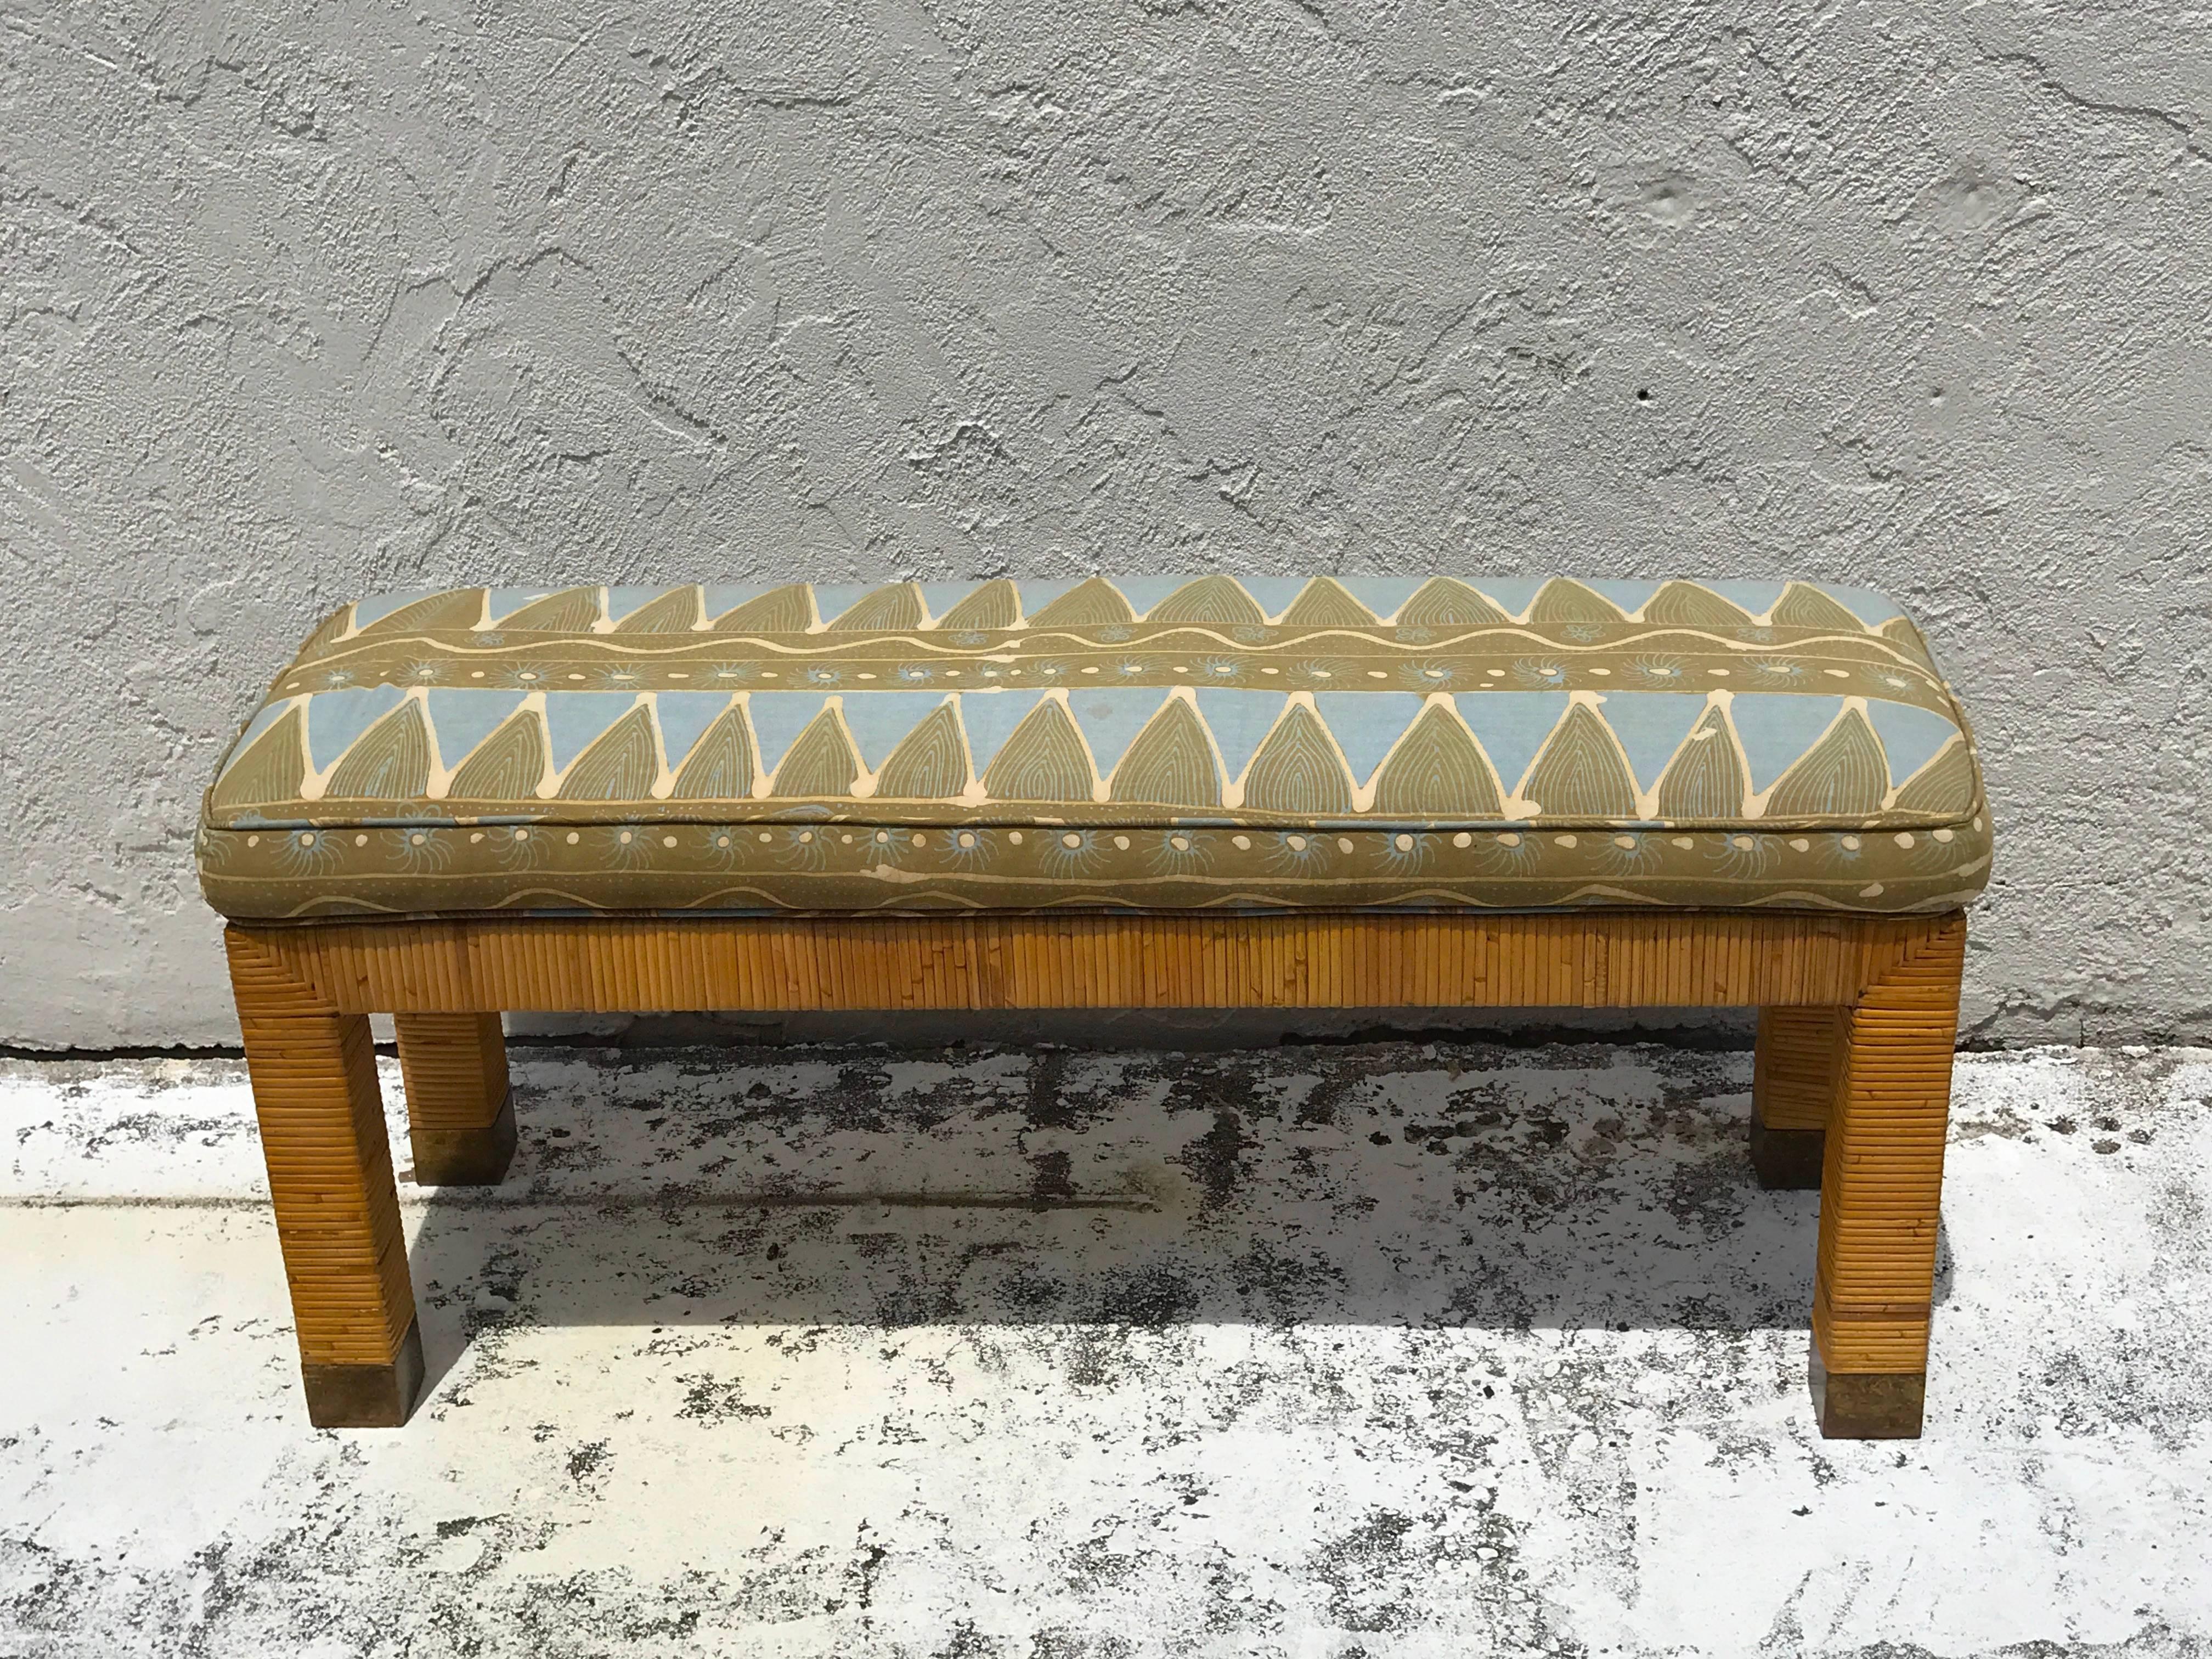 Midcentury rattan and reed long bench, fitted with brass end caps and upholstered seat cushion, ready for reupholstery in COM.
The bench without the cushion measures 42